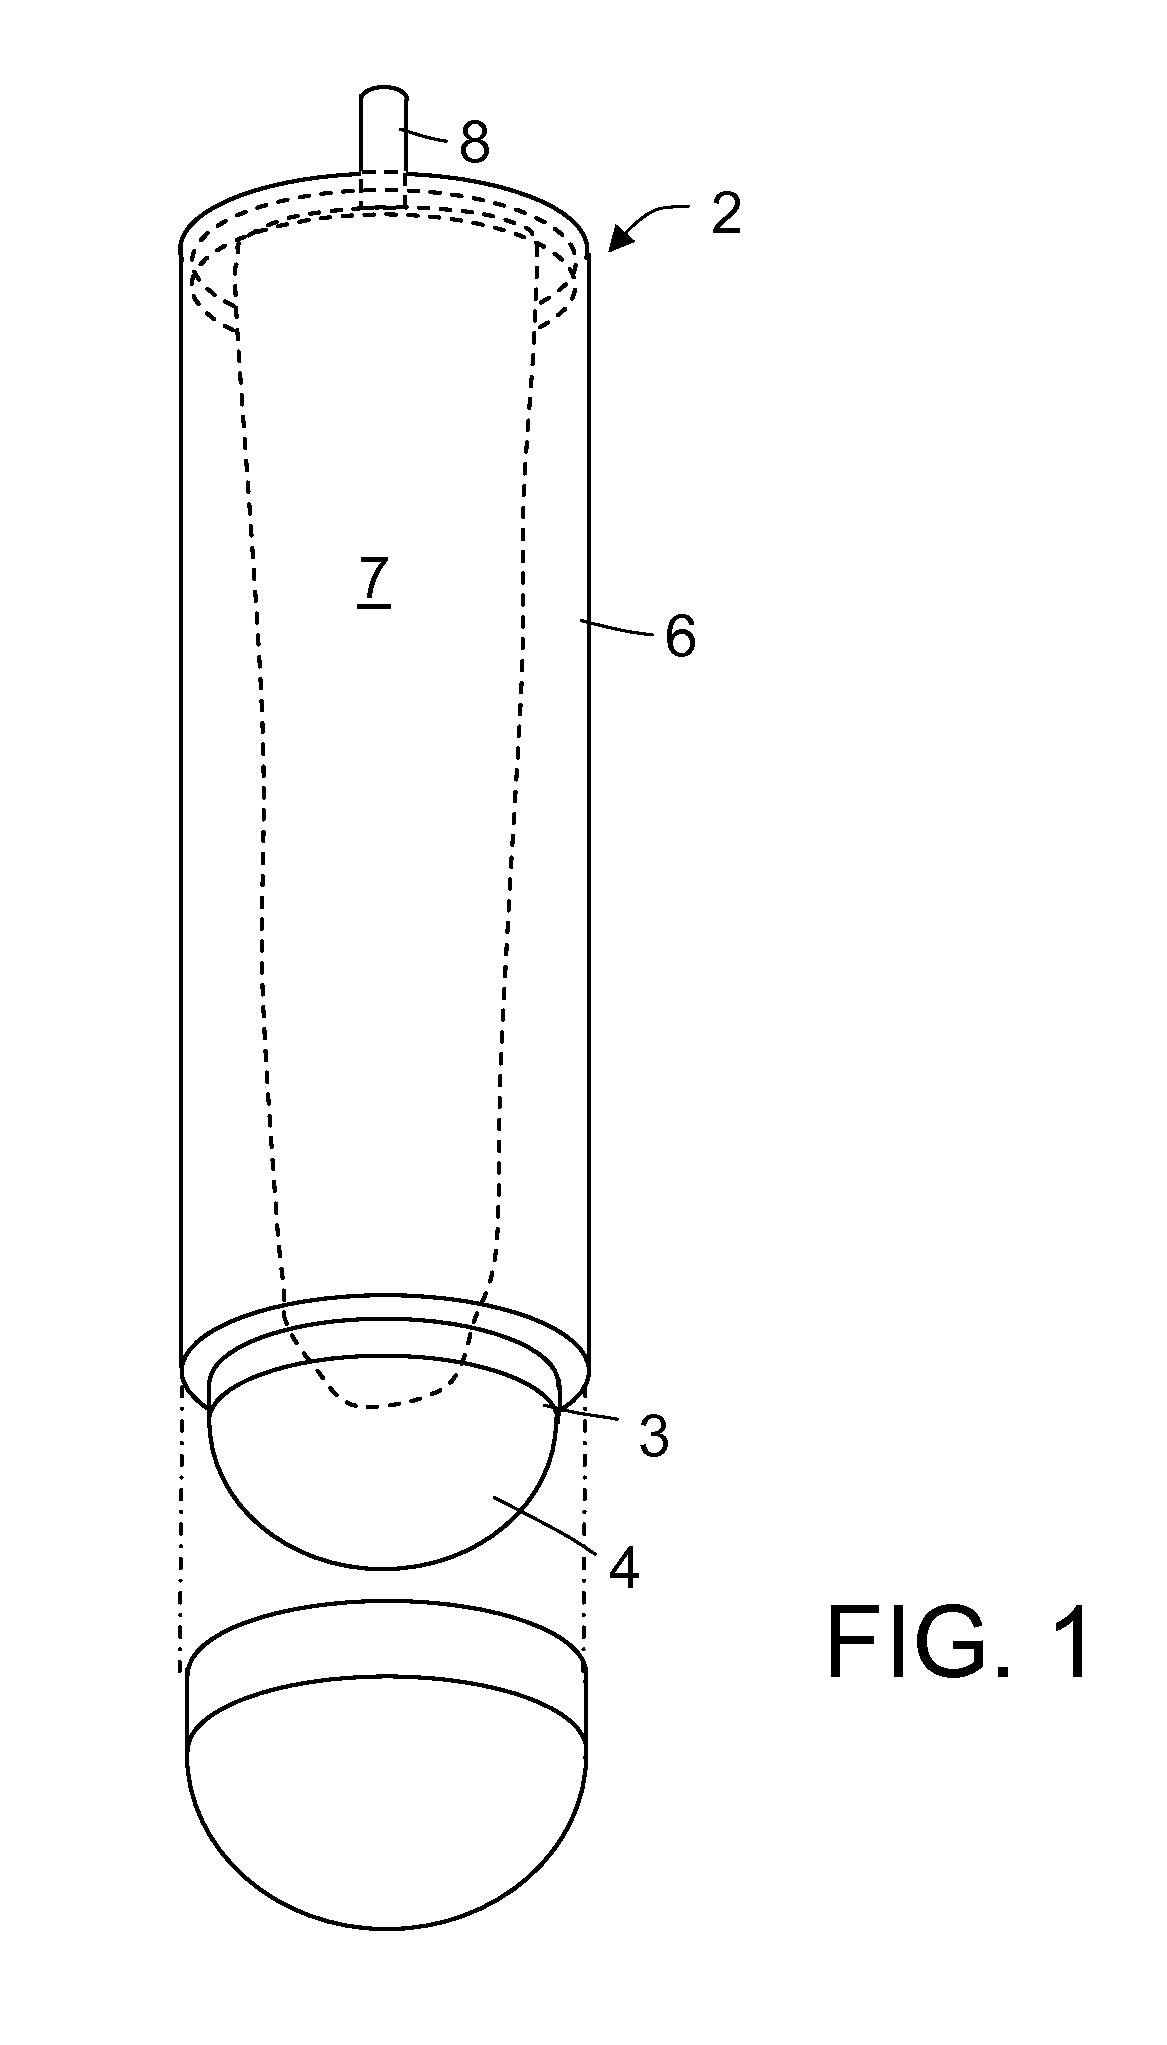 Cosmetic and Dermatological Cryotherapy Device